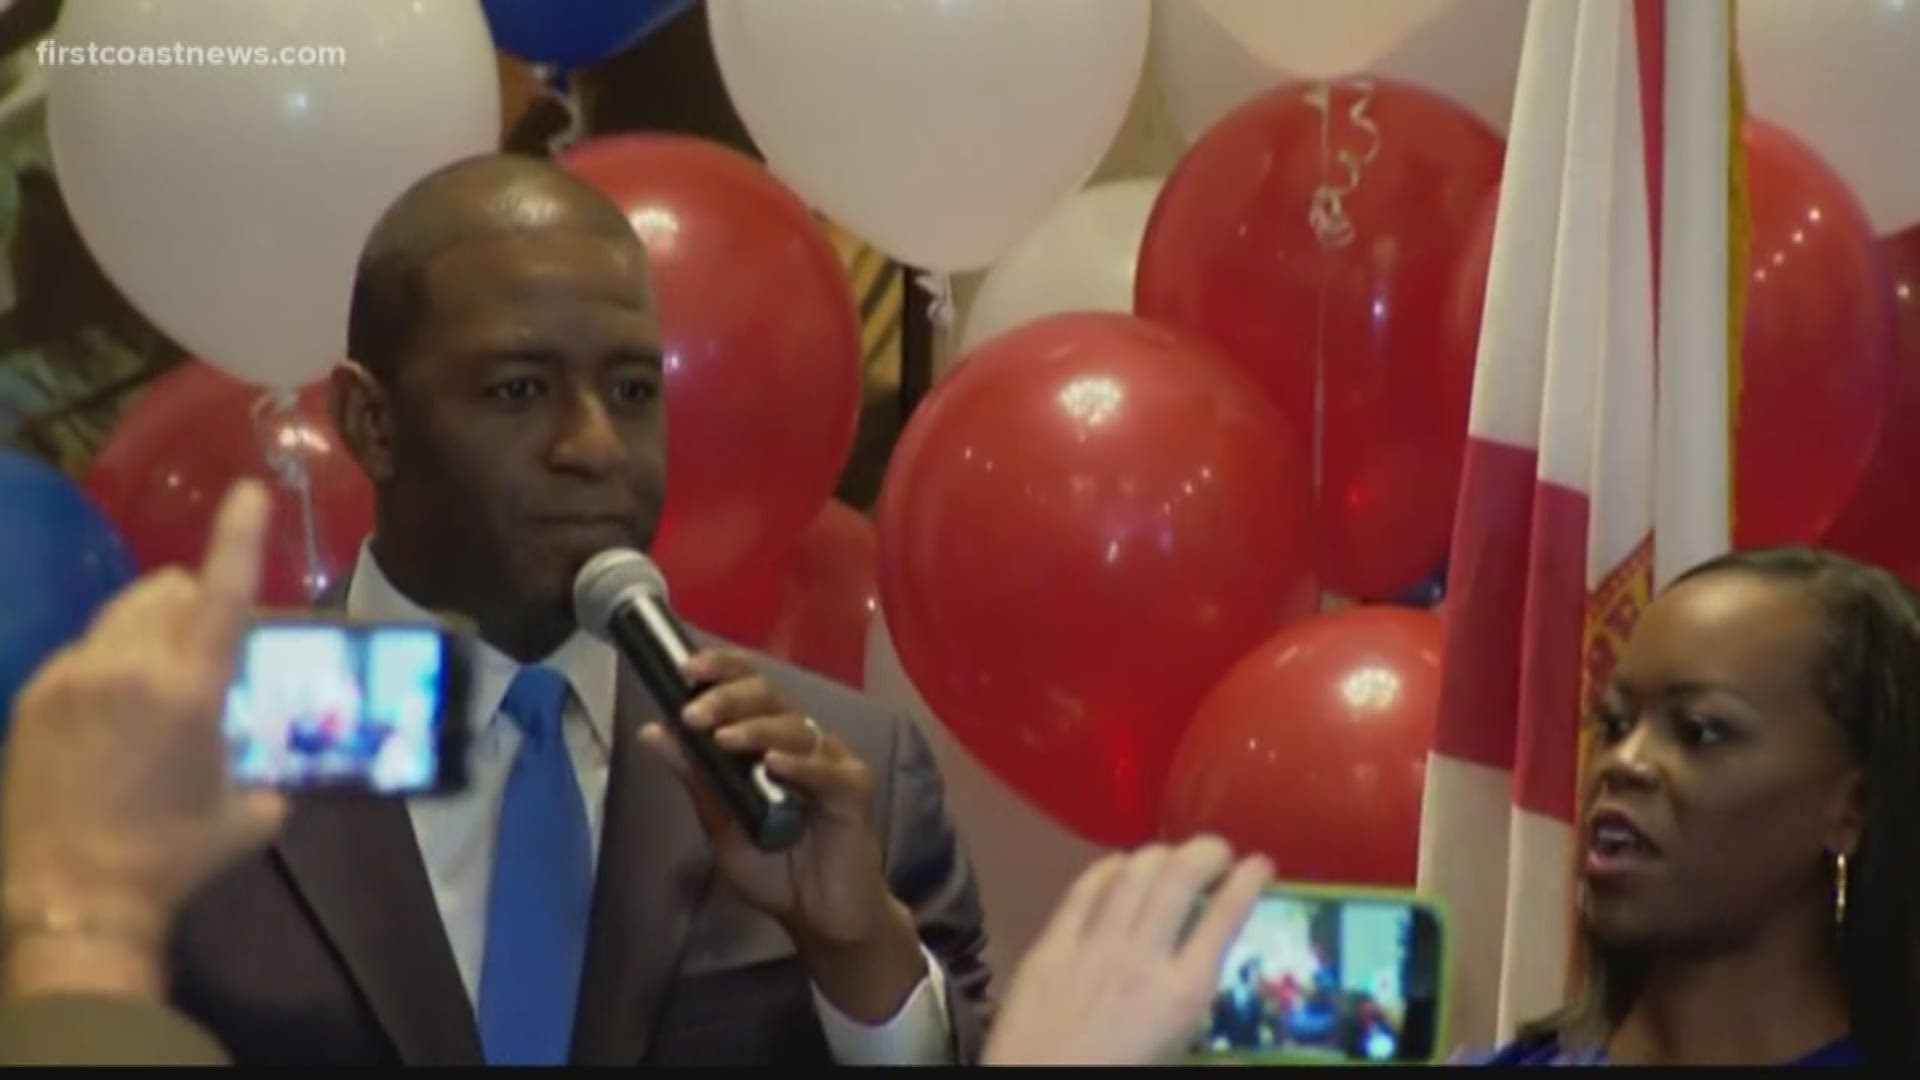 The mayor of Tallahassee, Andrew Gillum, has won the Democratic nomination in the race to be Florida's next governor.